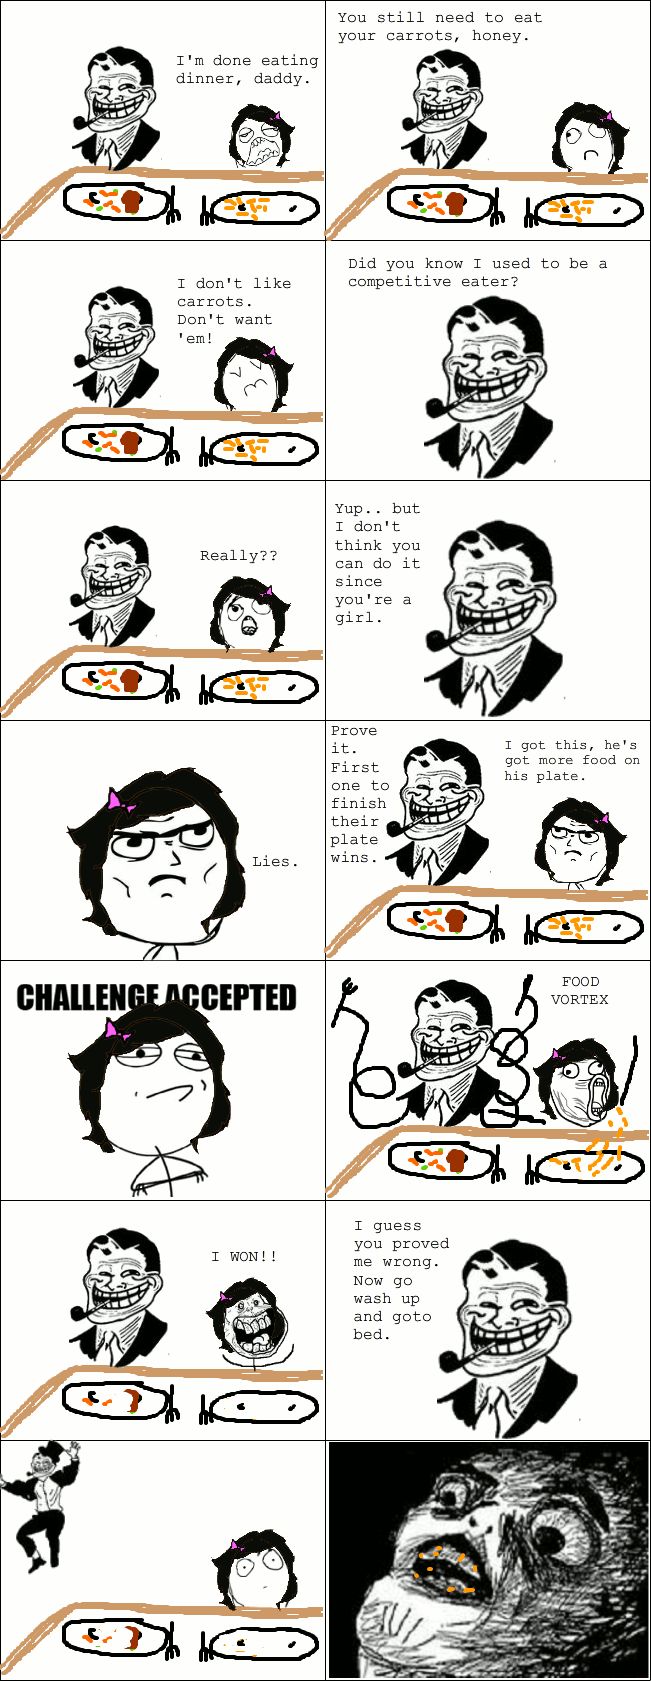 The Best Of Troll Dad Rage Comics Others